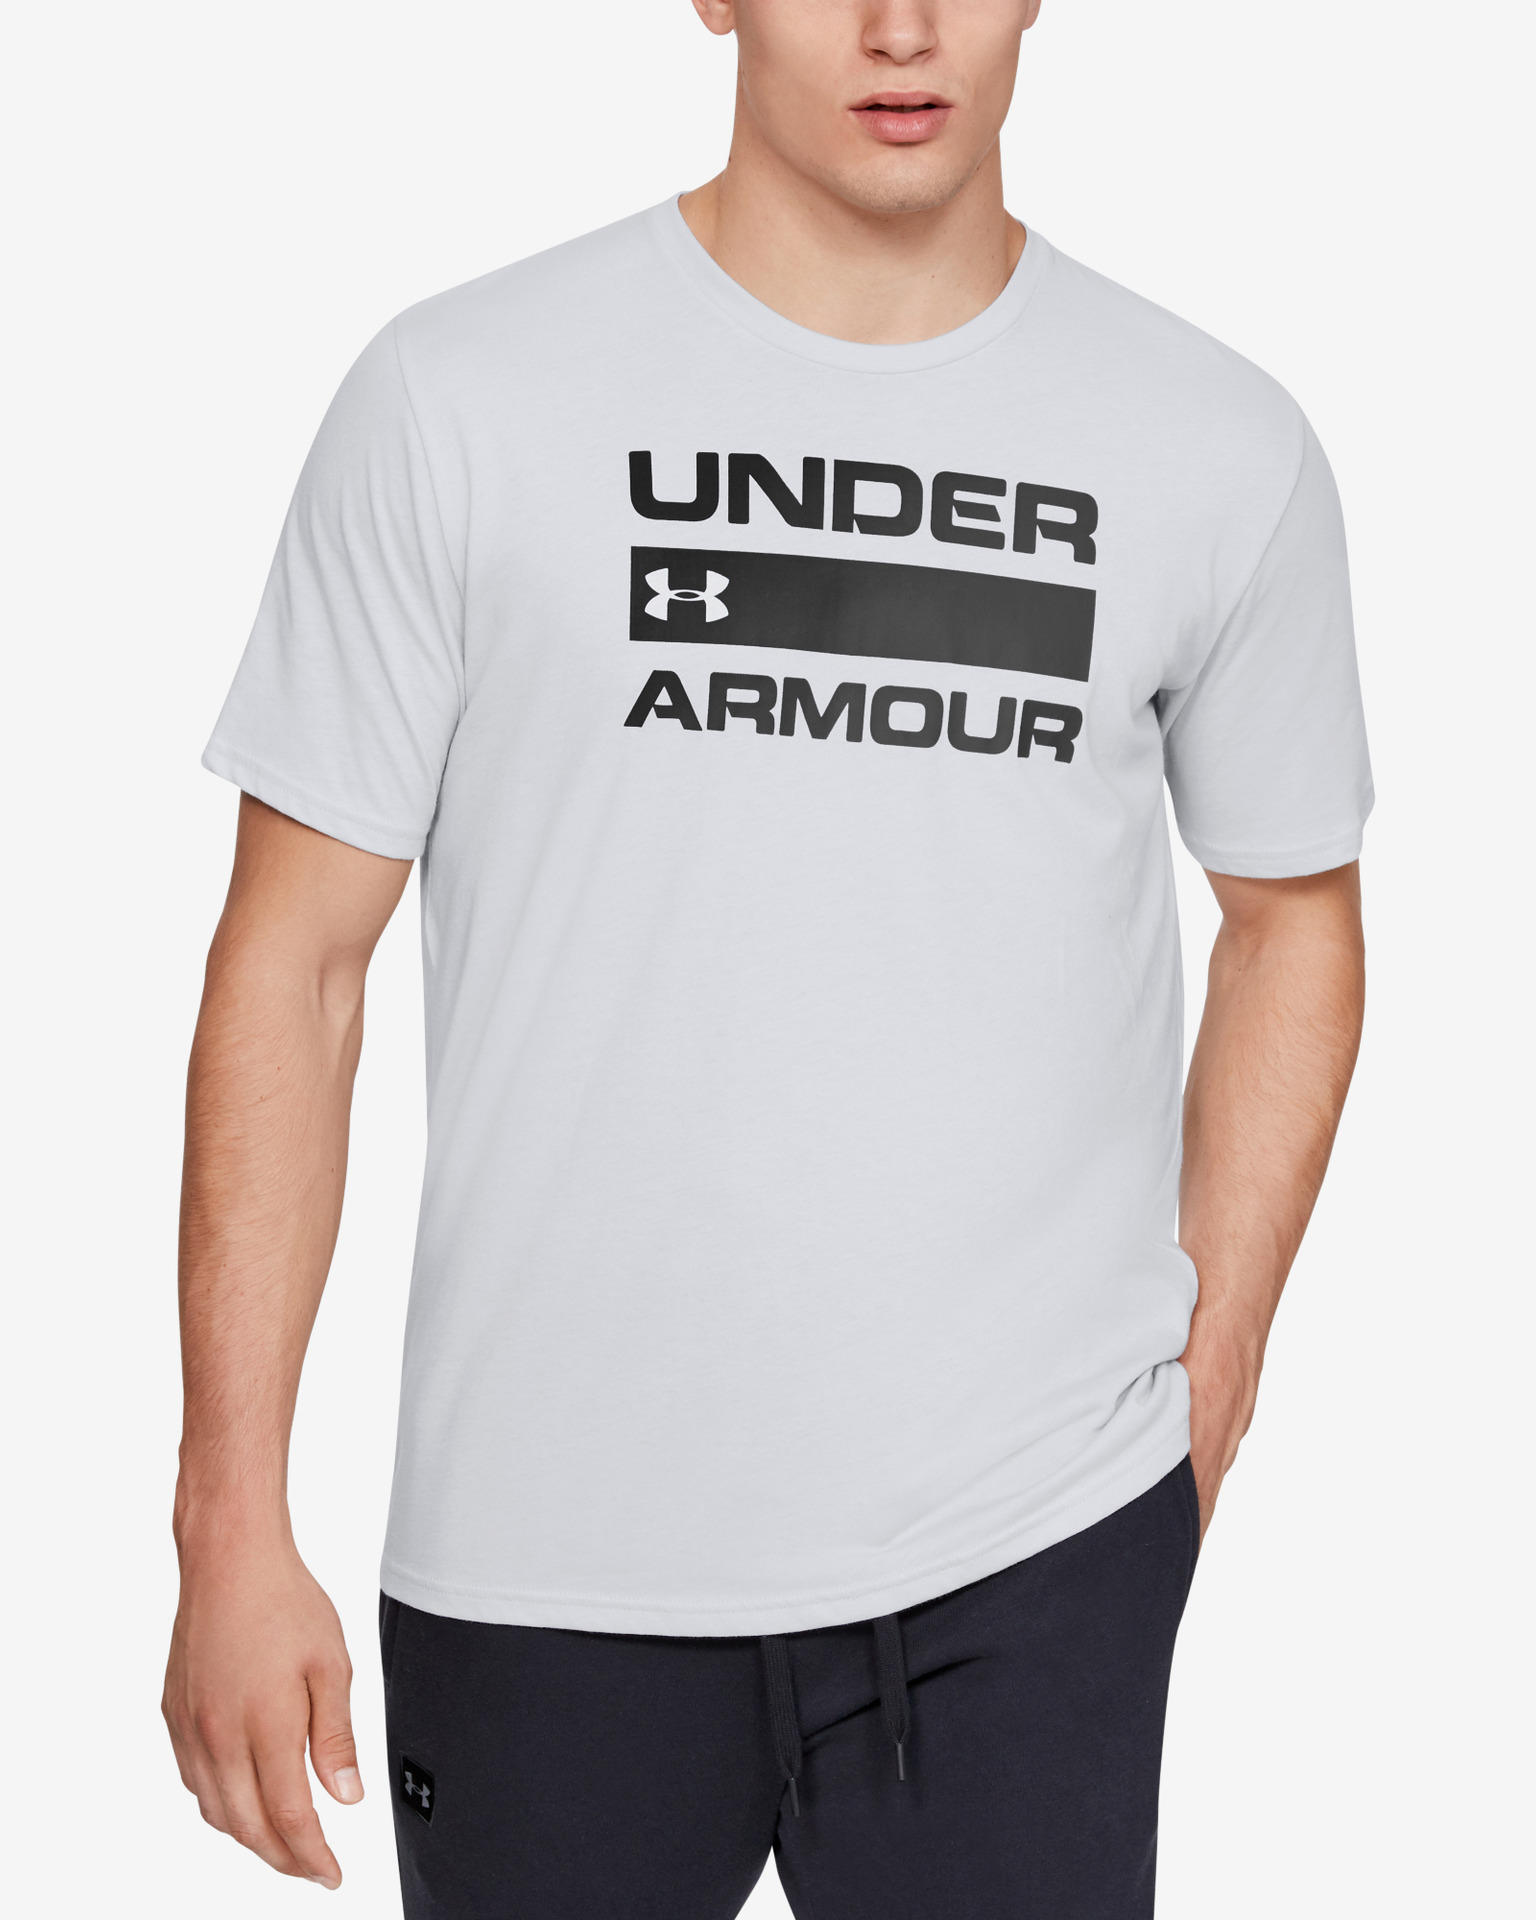 Details about   Under Armour Mens Team Issue Wordmark Sports Training Gym T Shirt 